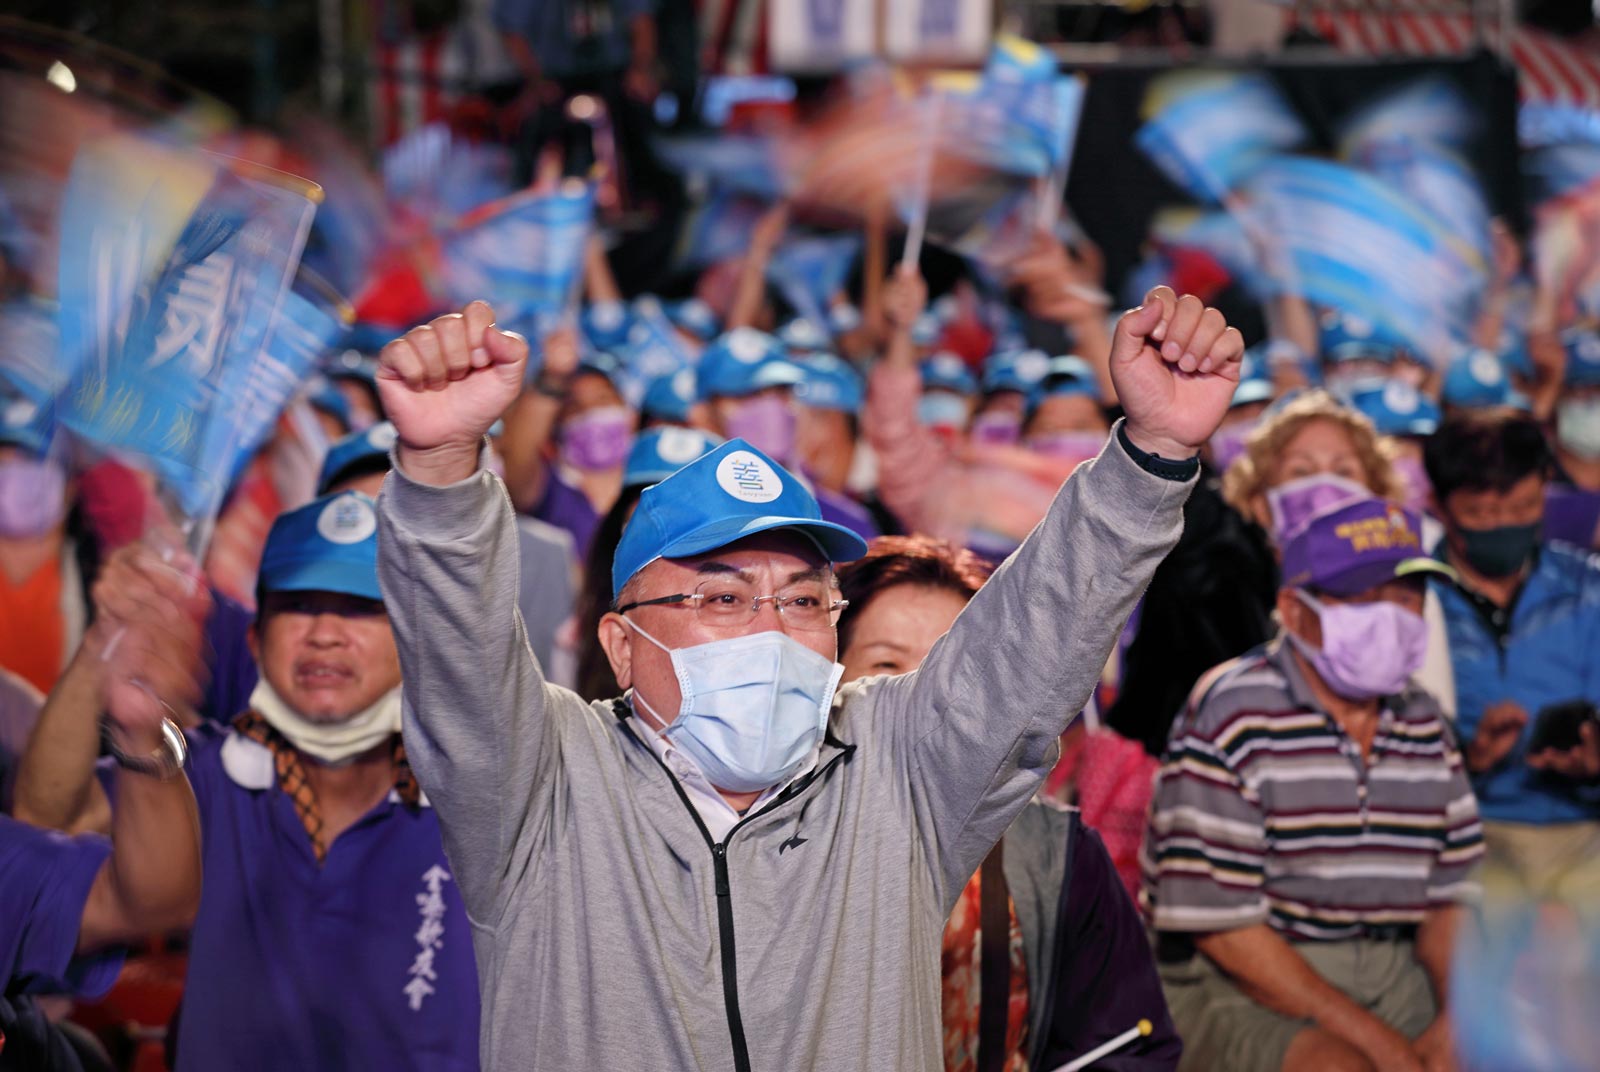 Does winning Taiwan’s local election pave the way to presidency?